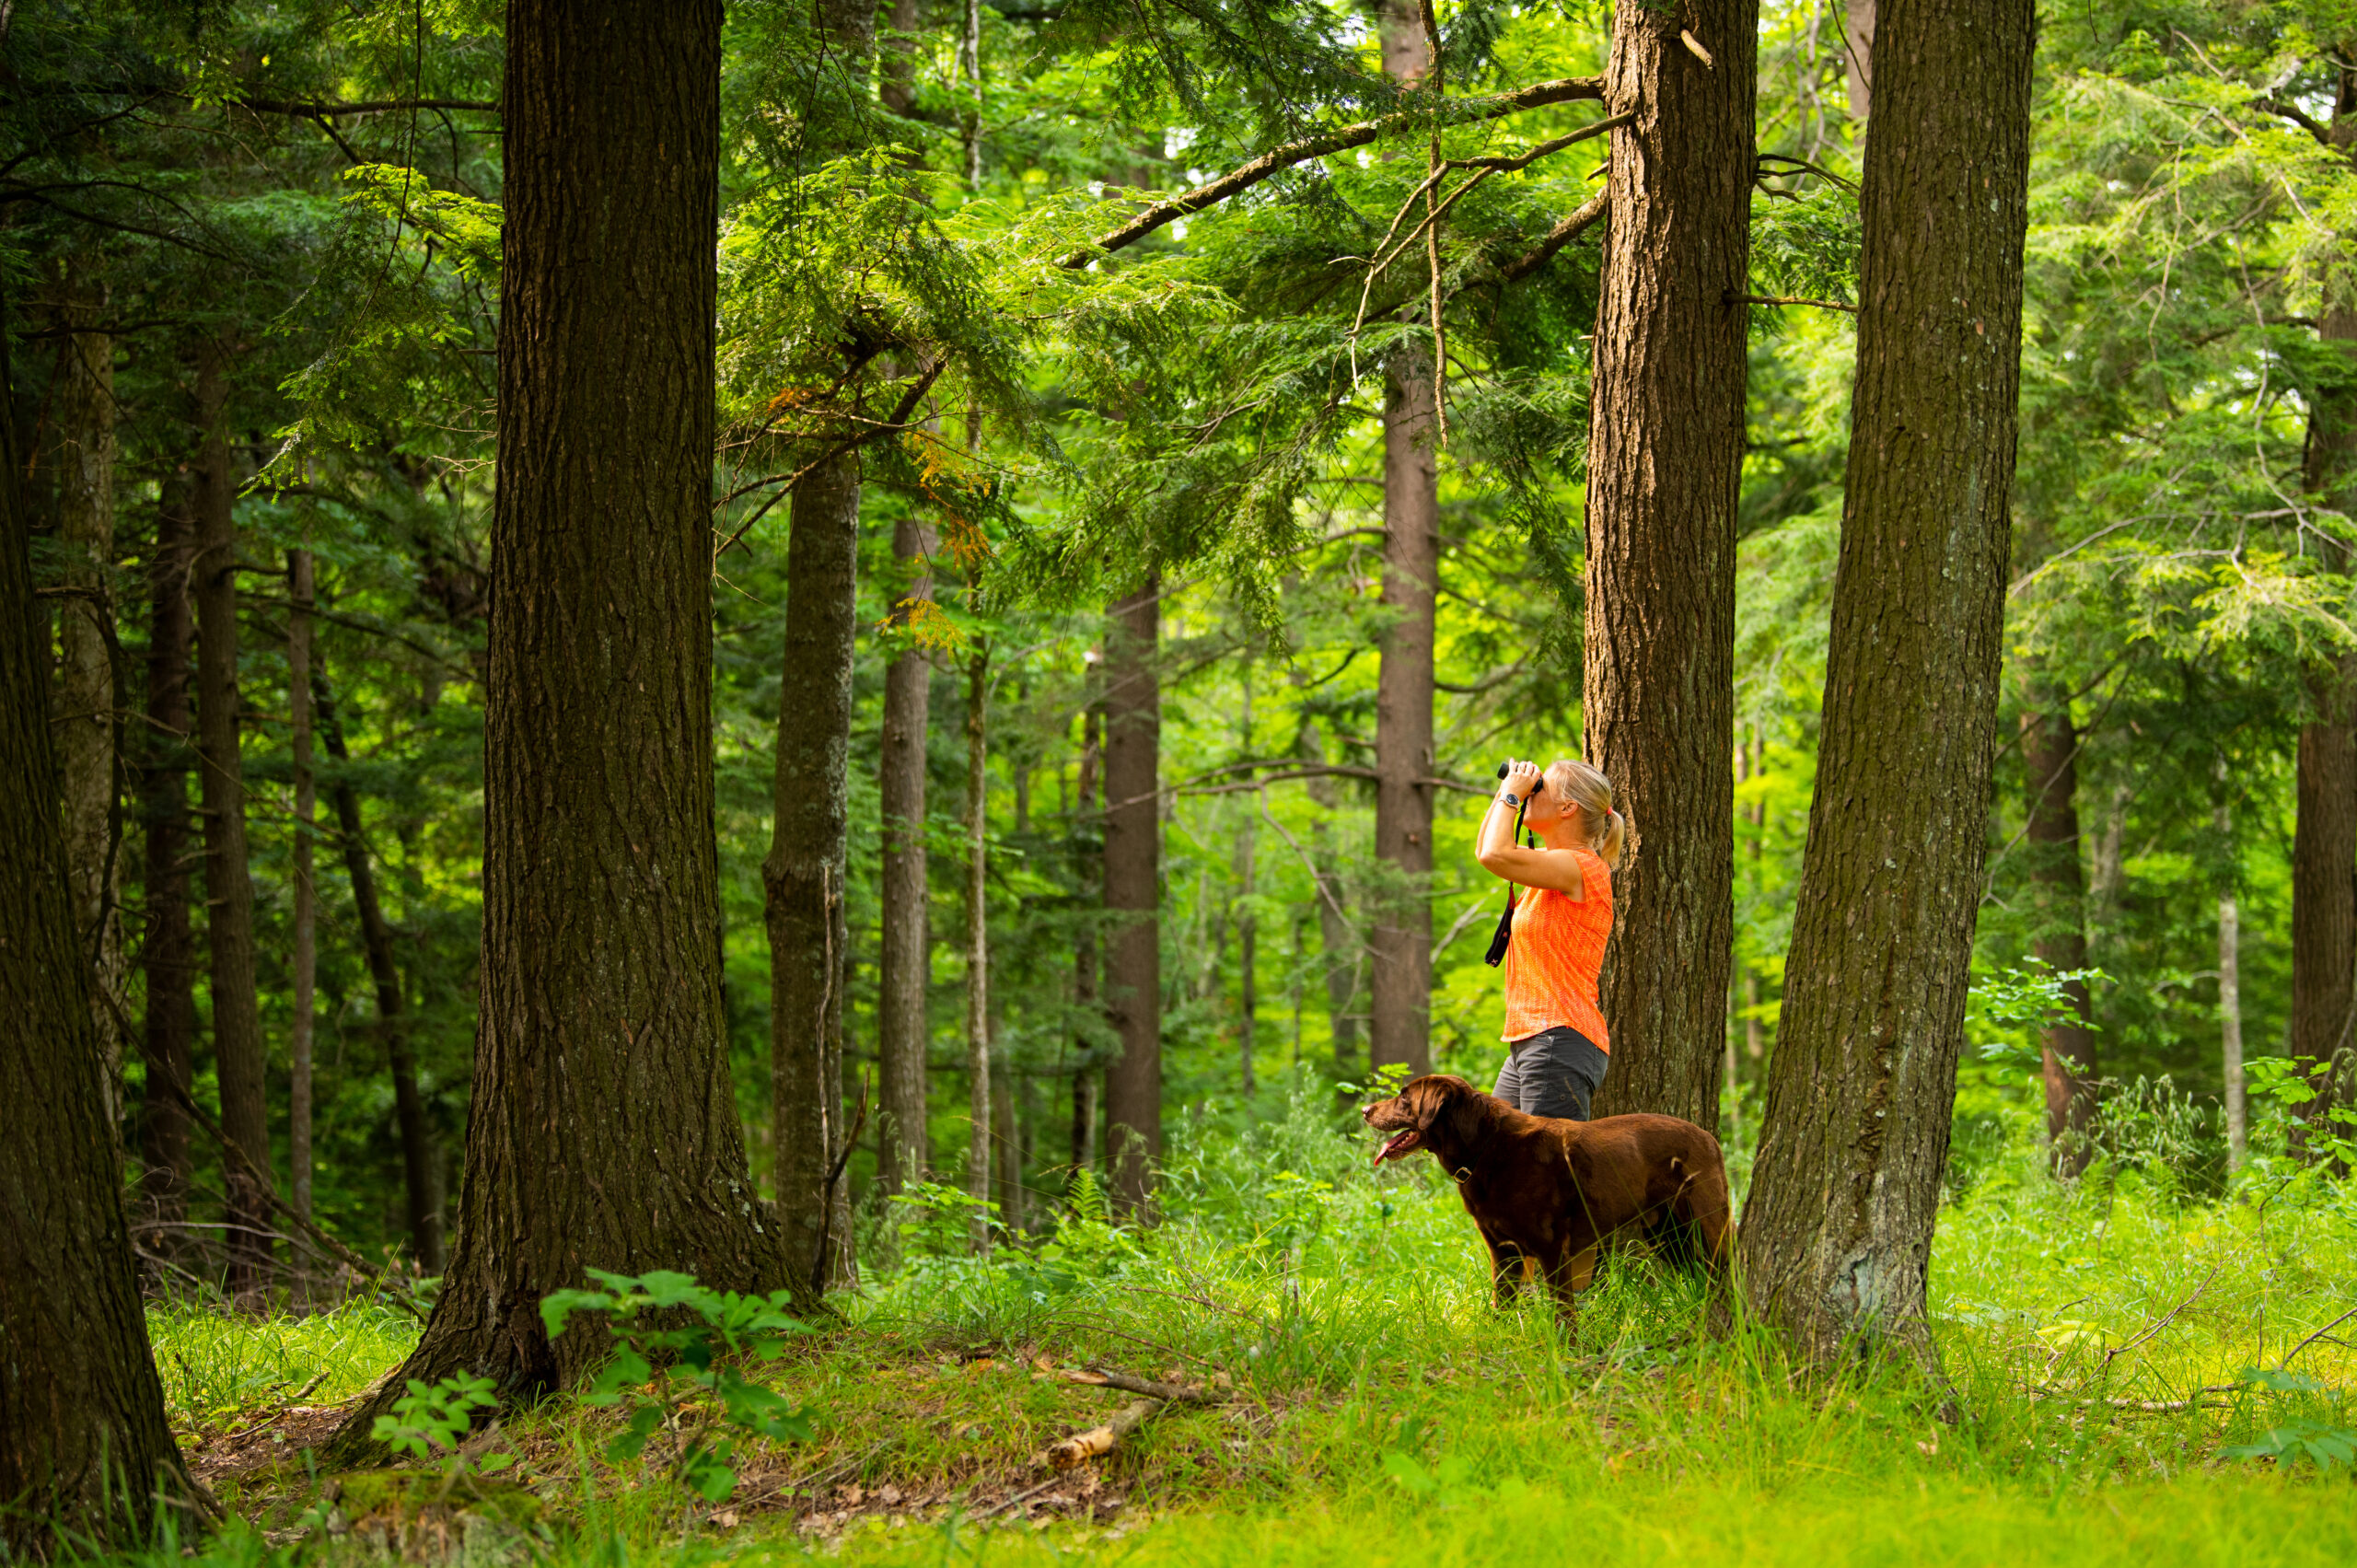 A blonde woman in an orange shirt and accompanied by a large black dog looks up with a pair of binoculars in the lush Pelican River forest